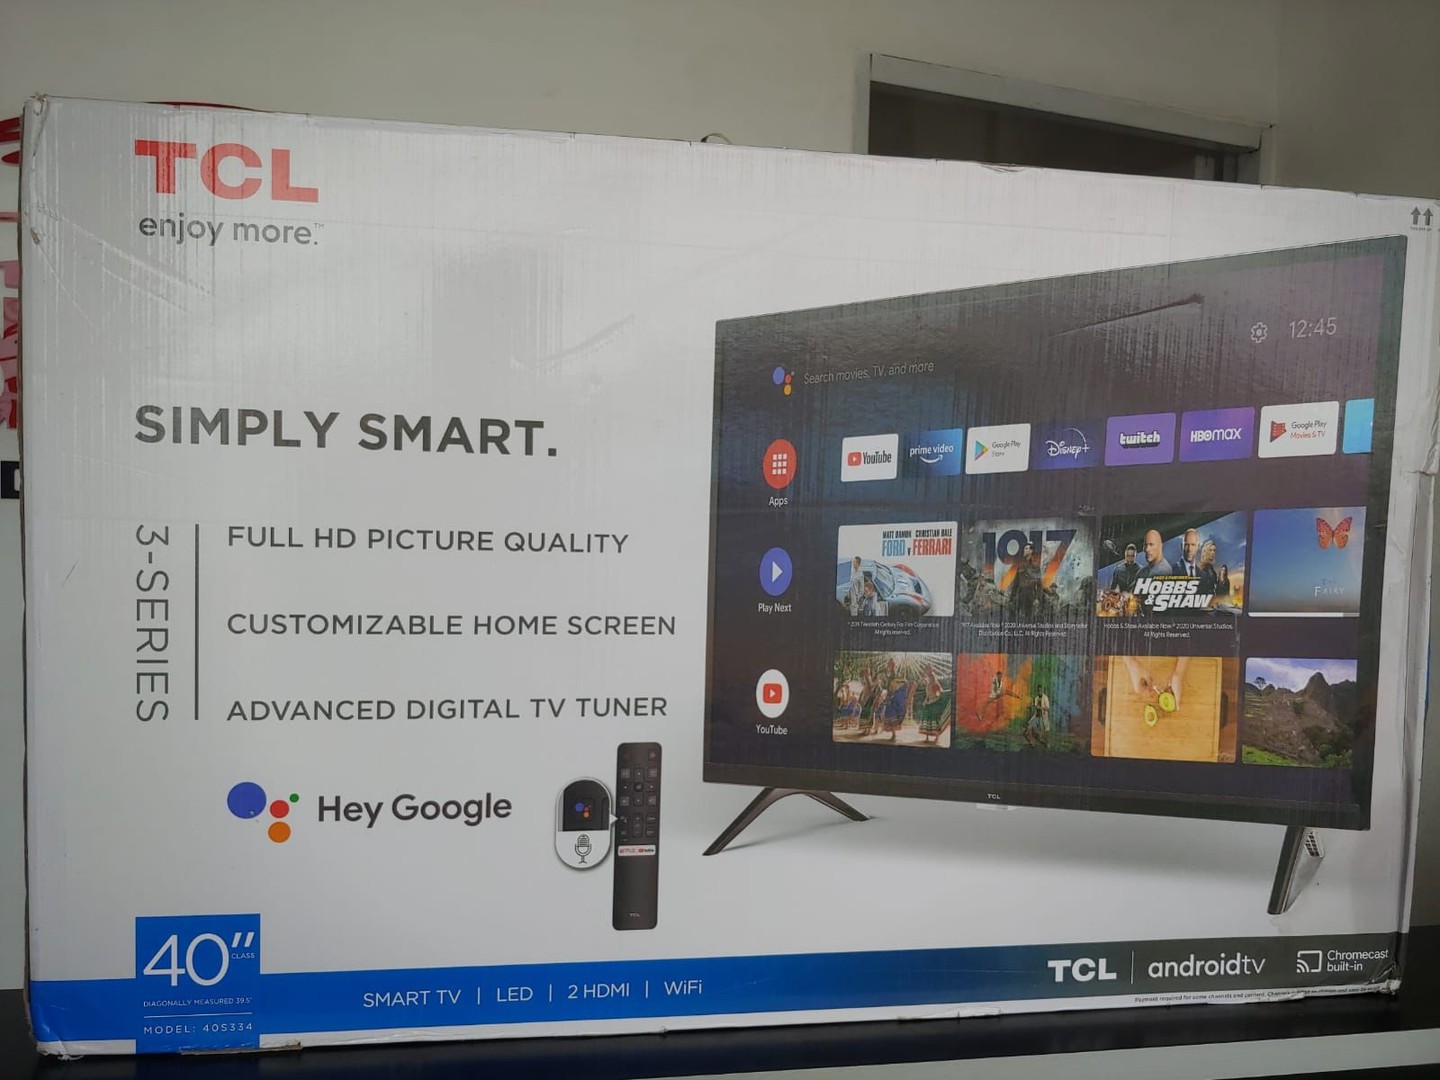 tv - TCL 40-inch Class 3-Series HD LED Smart Android TV - 40S334

Nueva sellada

